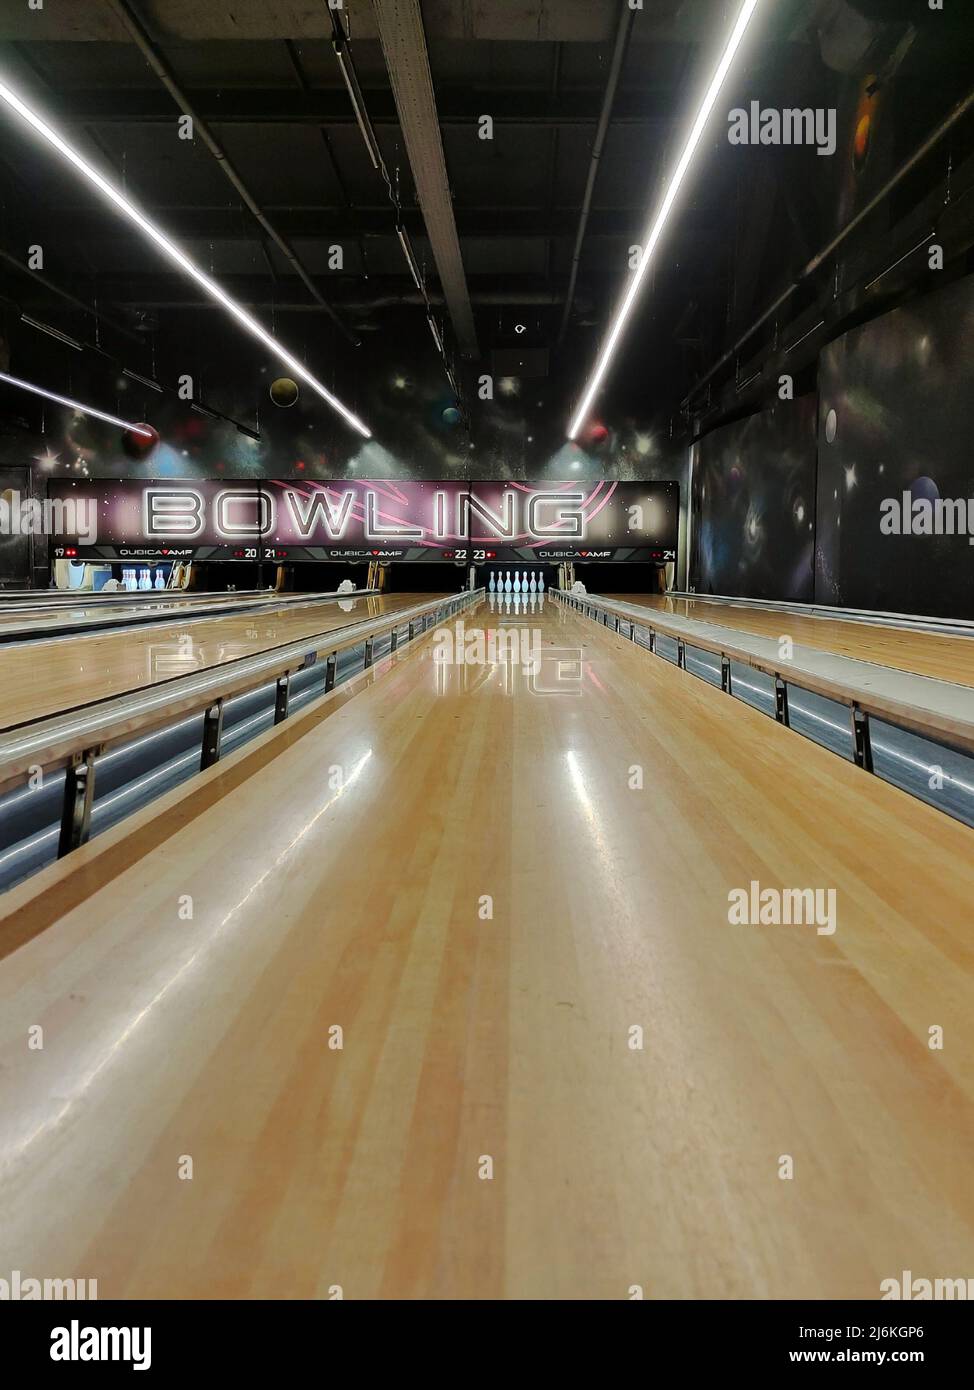 Front view of a bowling alley. Photographed in perspective Stock Photo